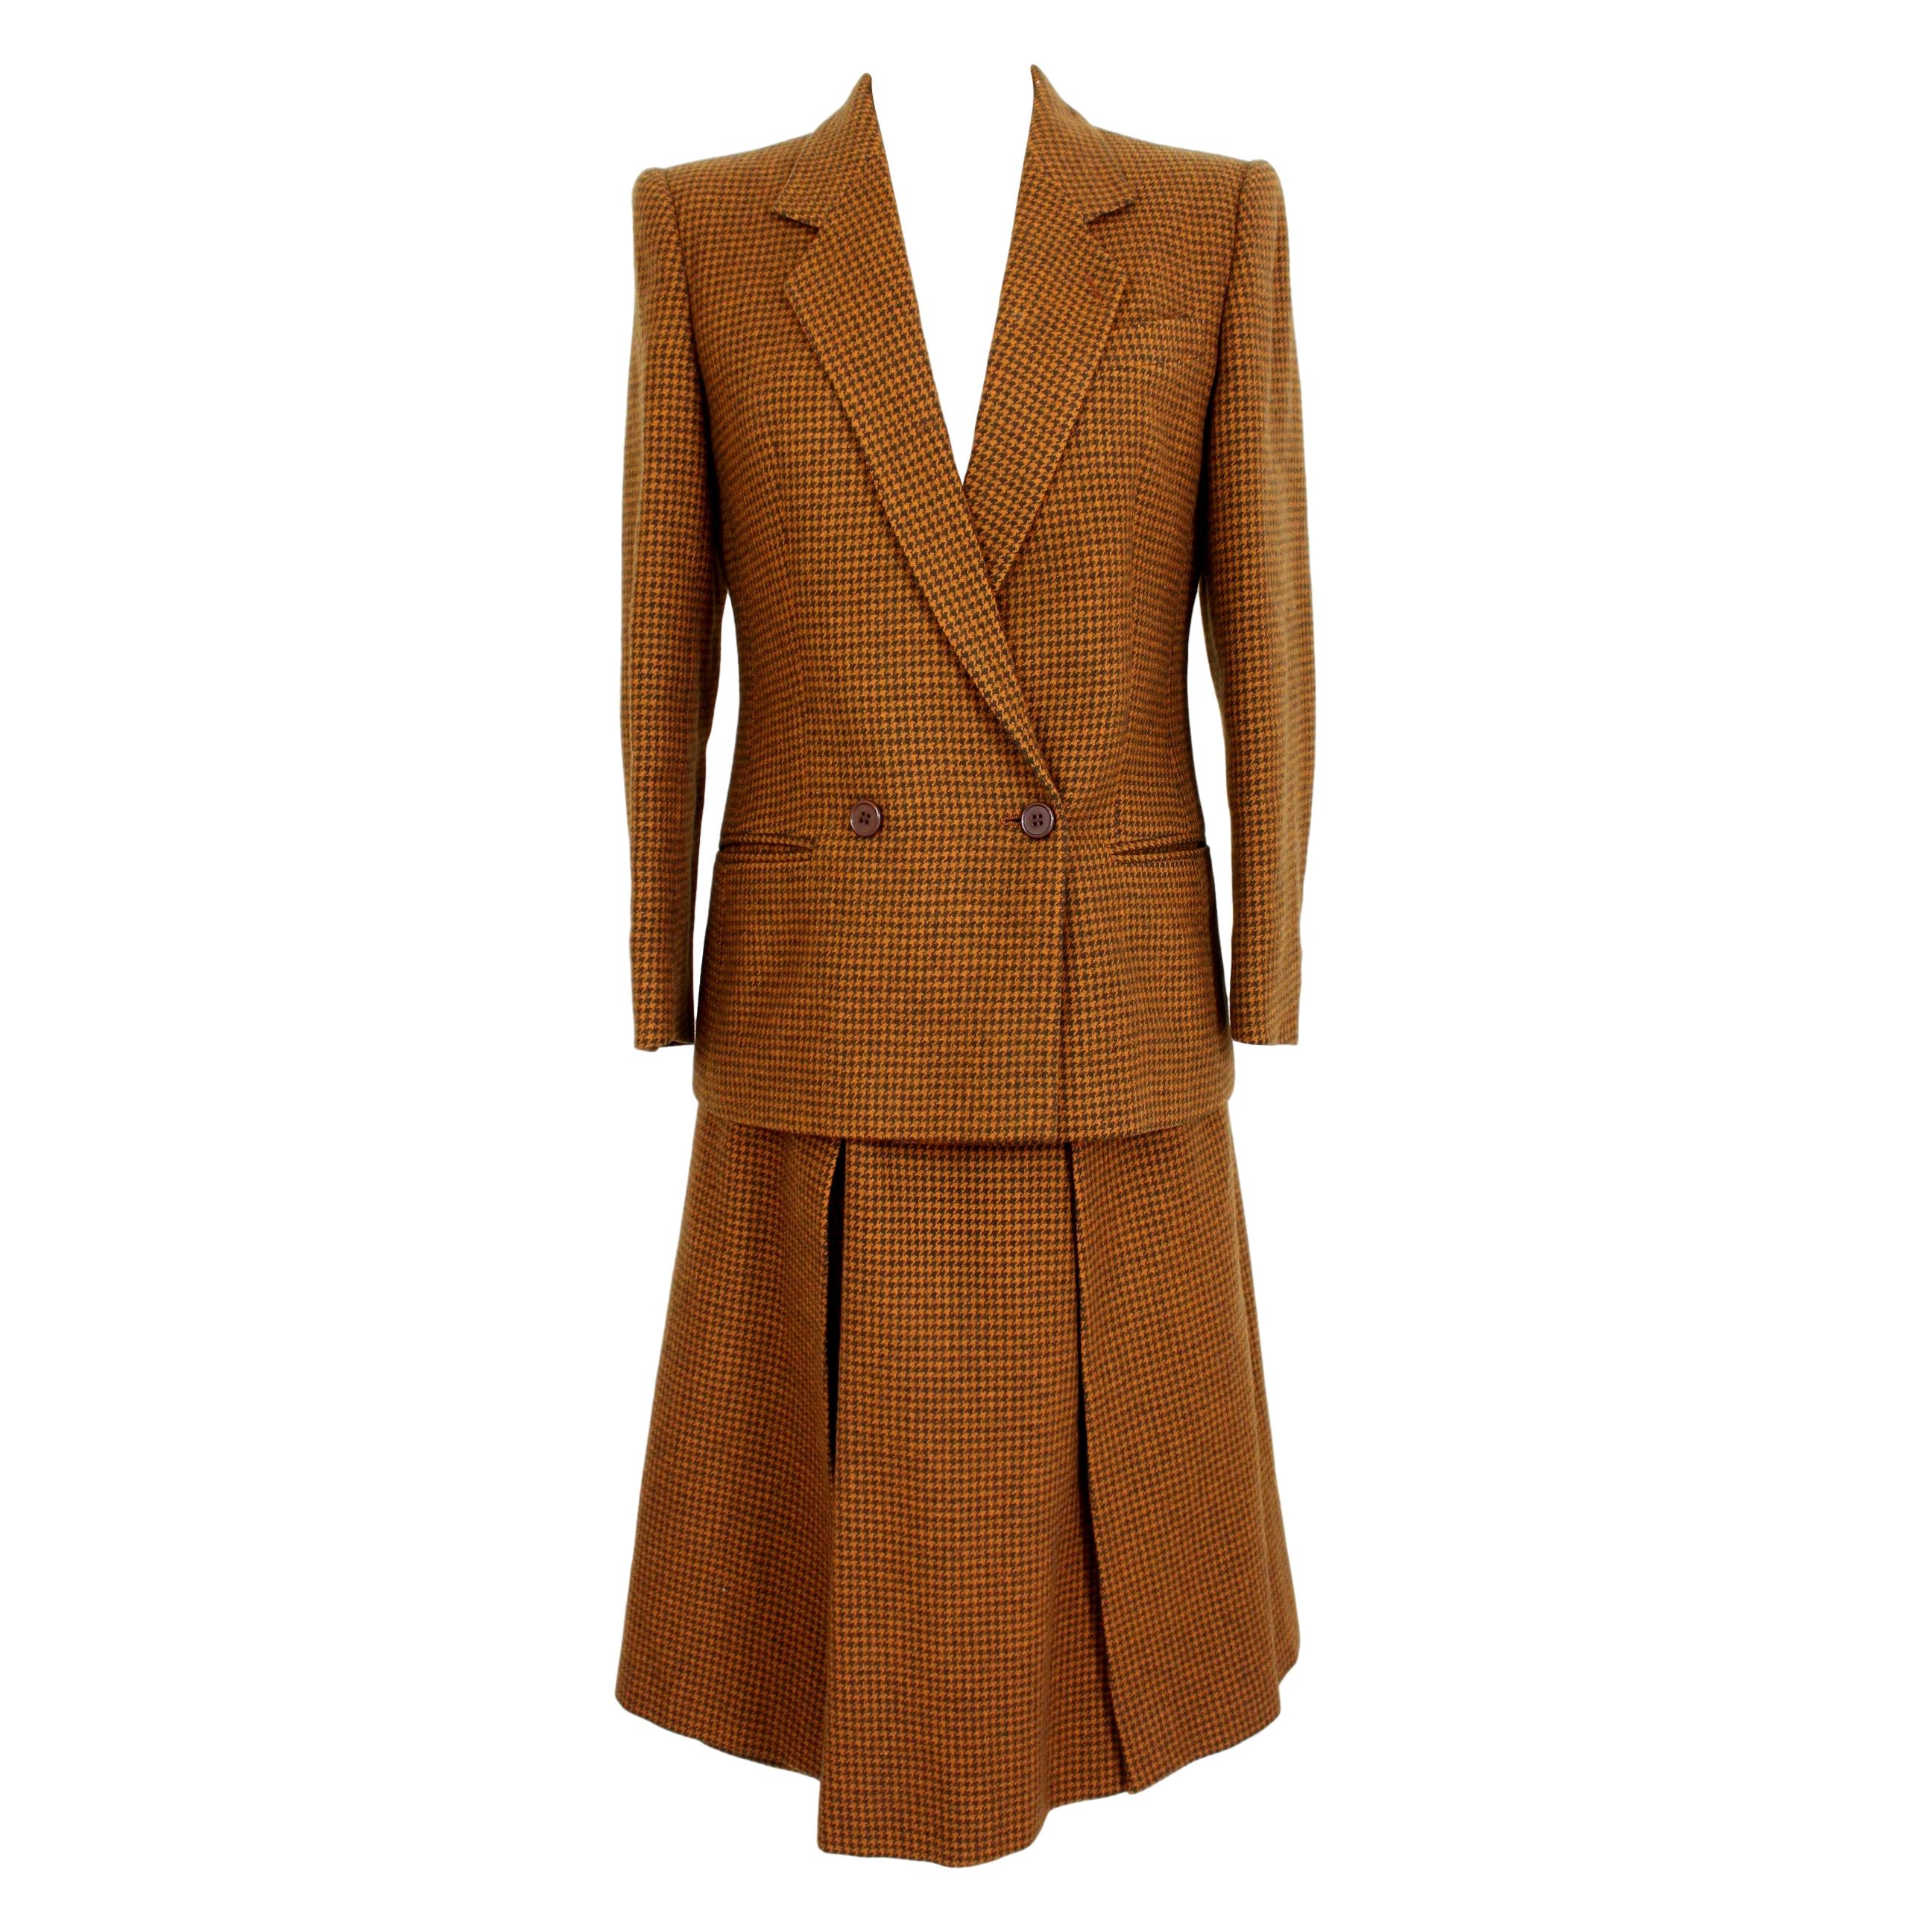 Valentino Miss V Beige Brown Wool Check Double Breasted Jacket Skirt Suit 